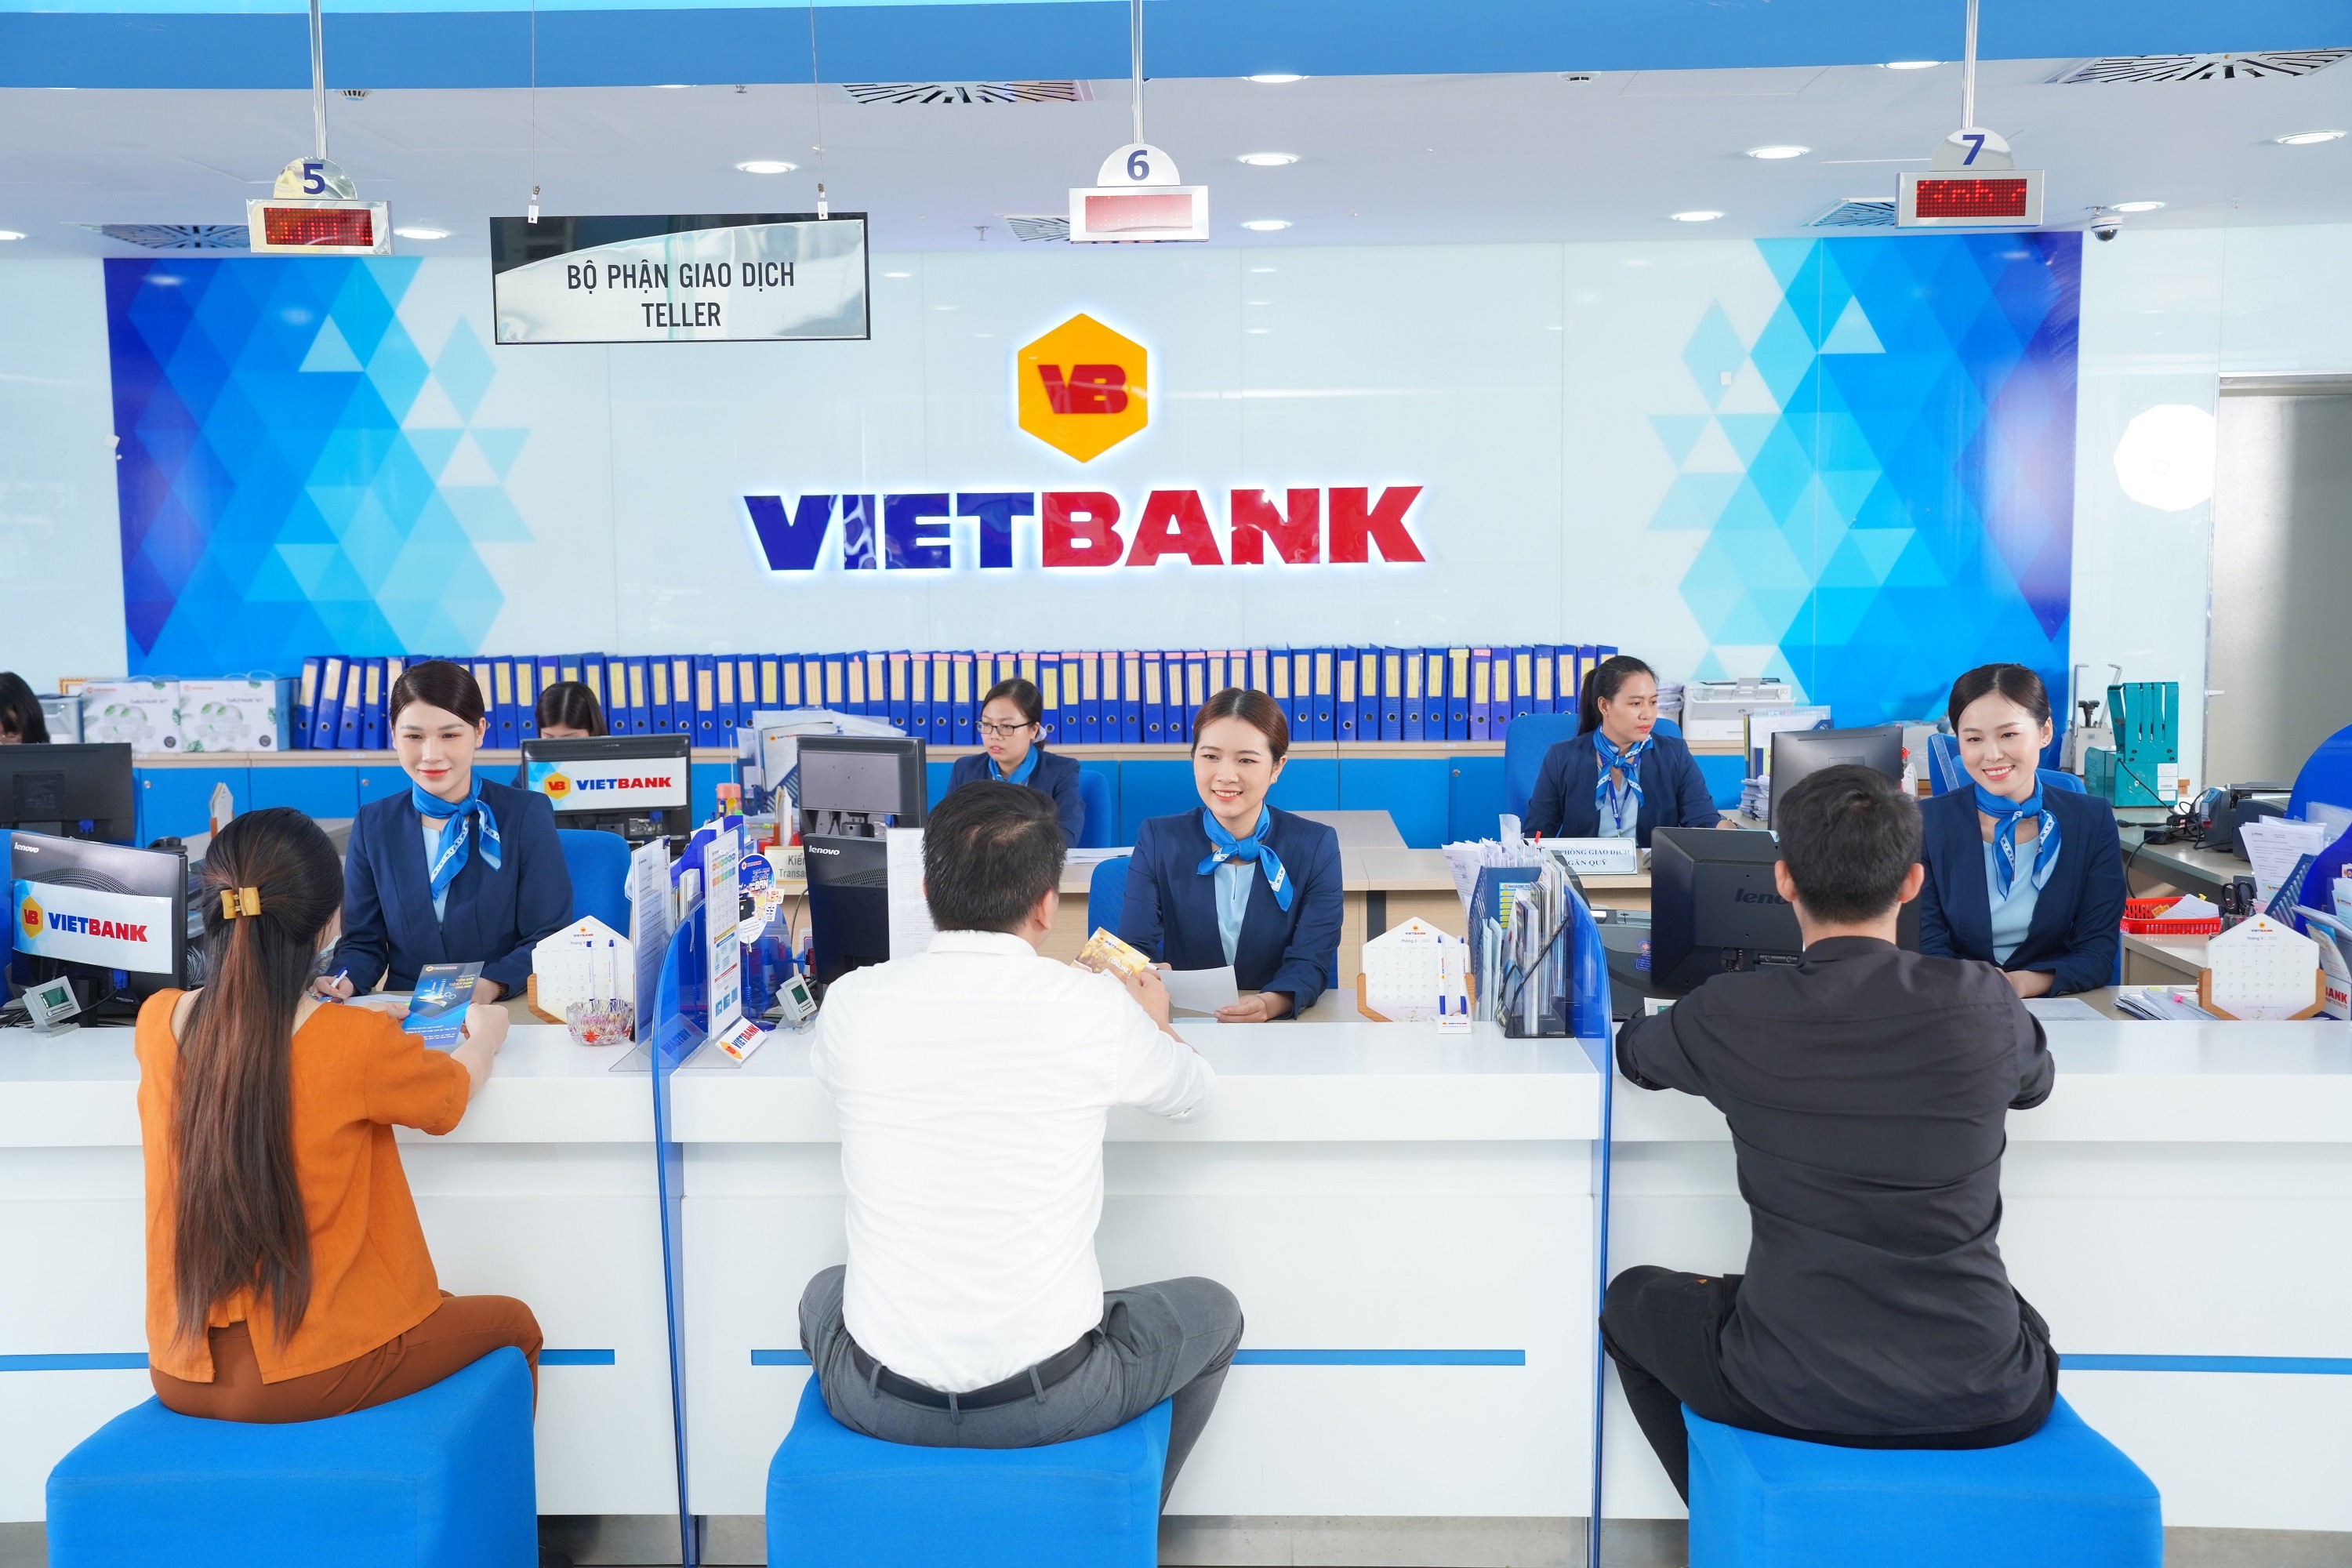 3-vietbank-canh-giao-dich-1682391776.JPG